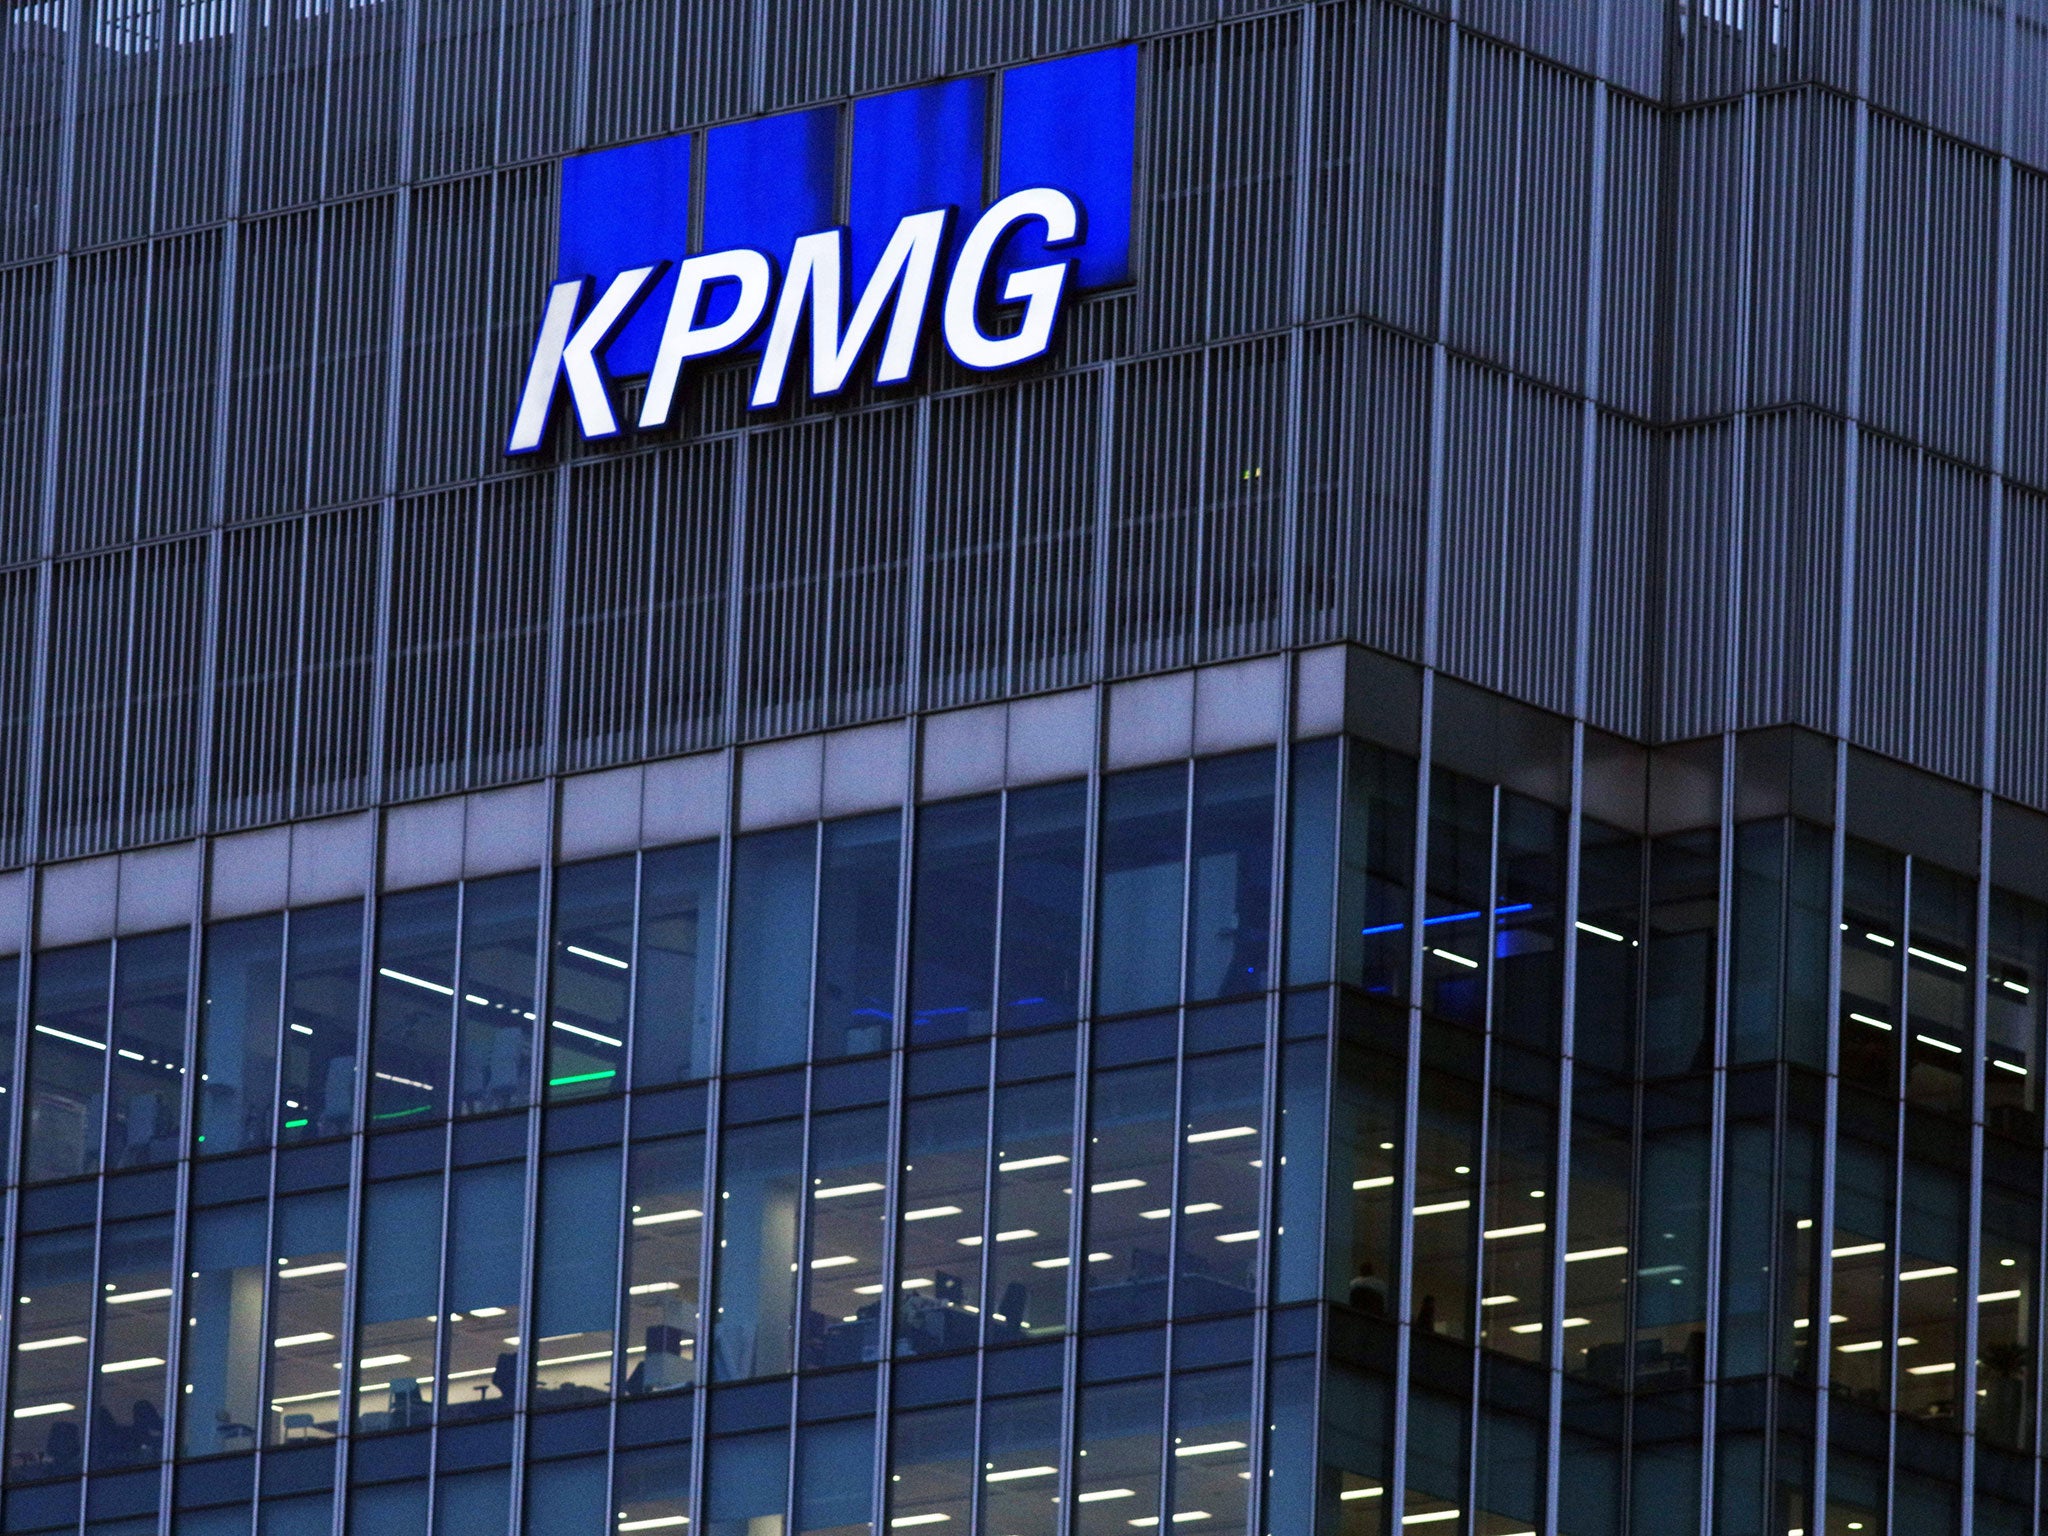 KPMG said it would donate the £2.21m it earned in fees from Gupta-controlled firms to charity